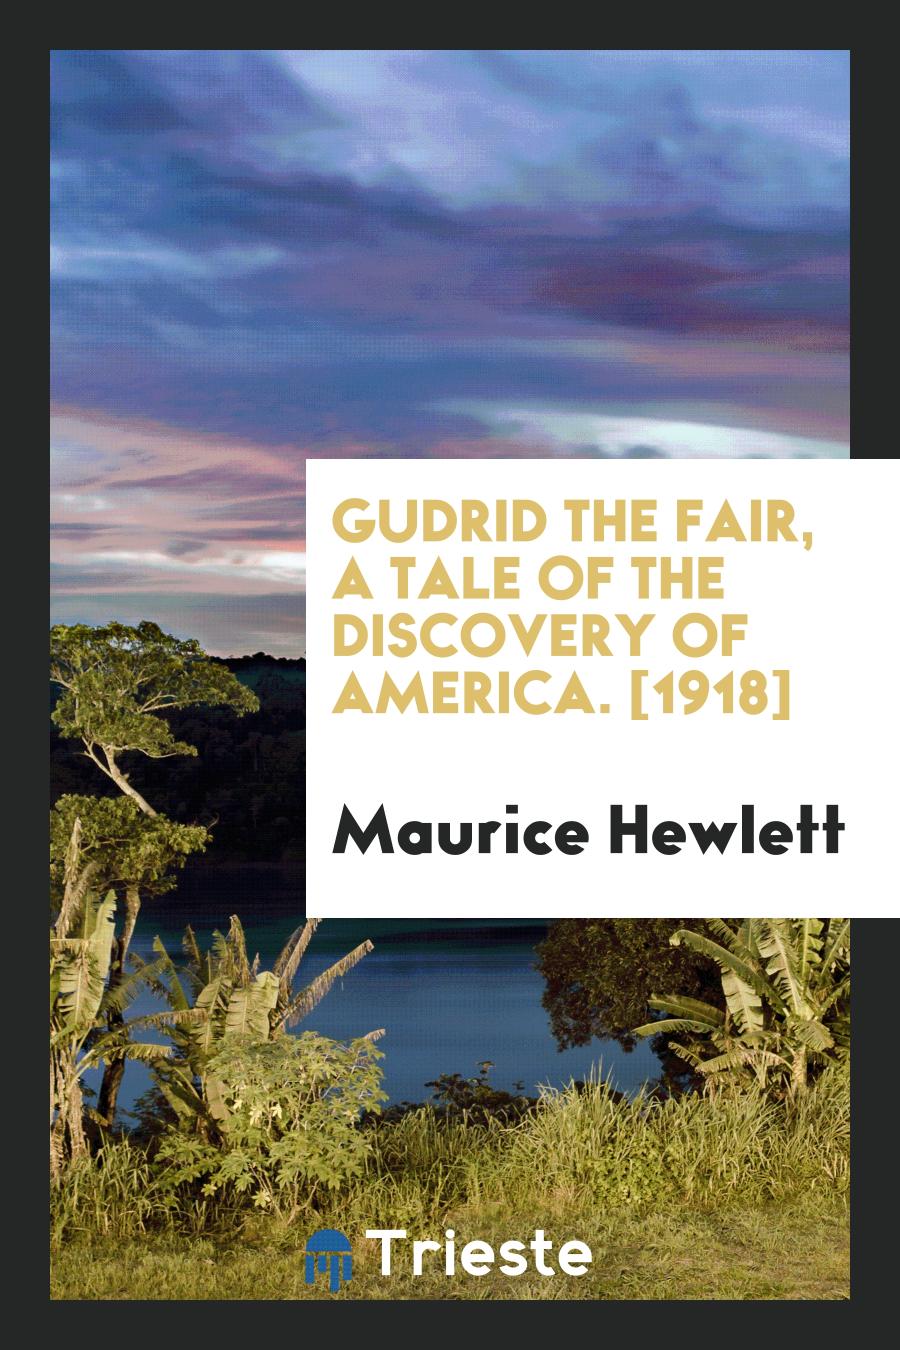 Gudrid the Fair, a Tale of the Discovery of America. [1918]